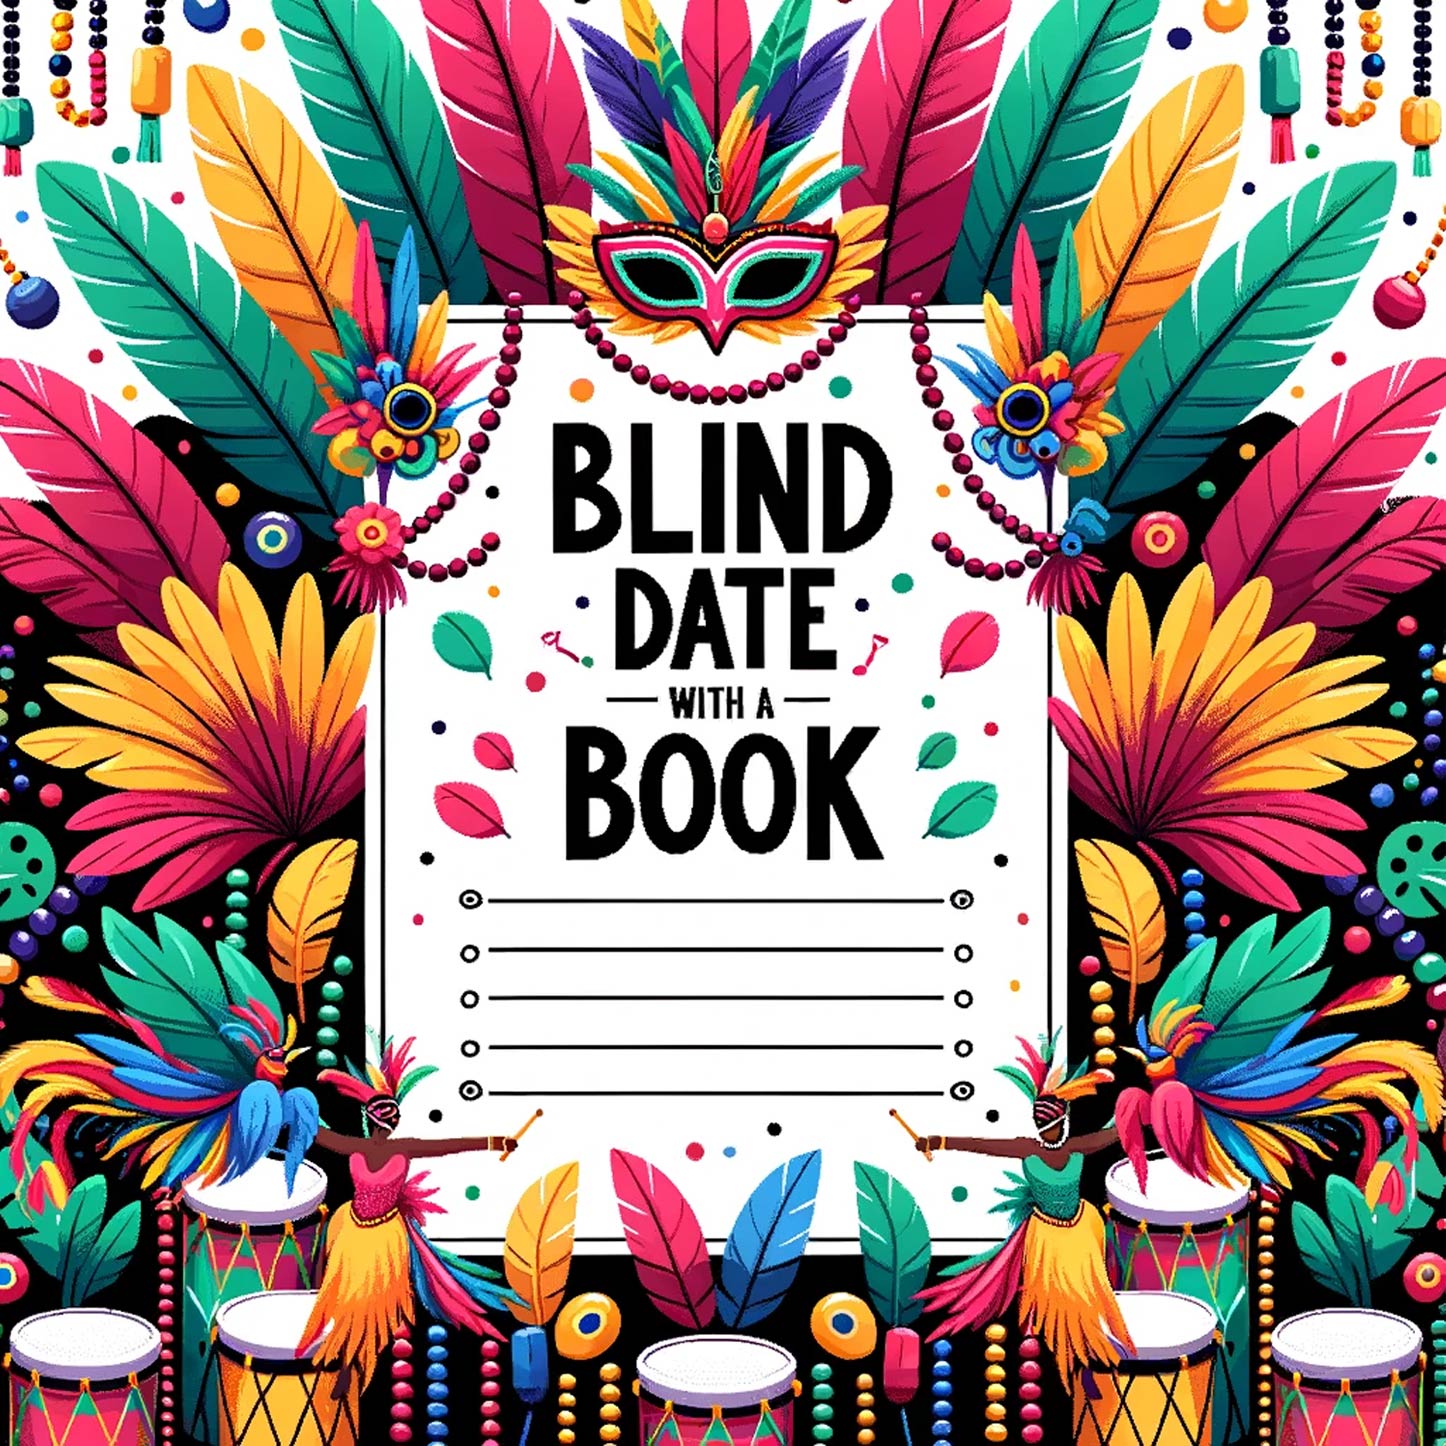 Blind Date With A Book Free Template - Brazilian